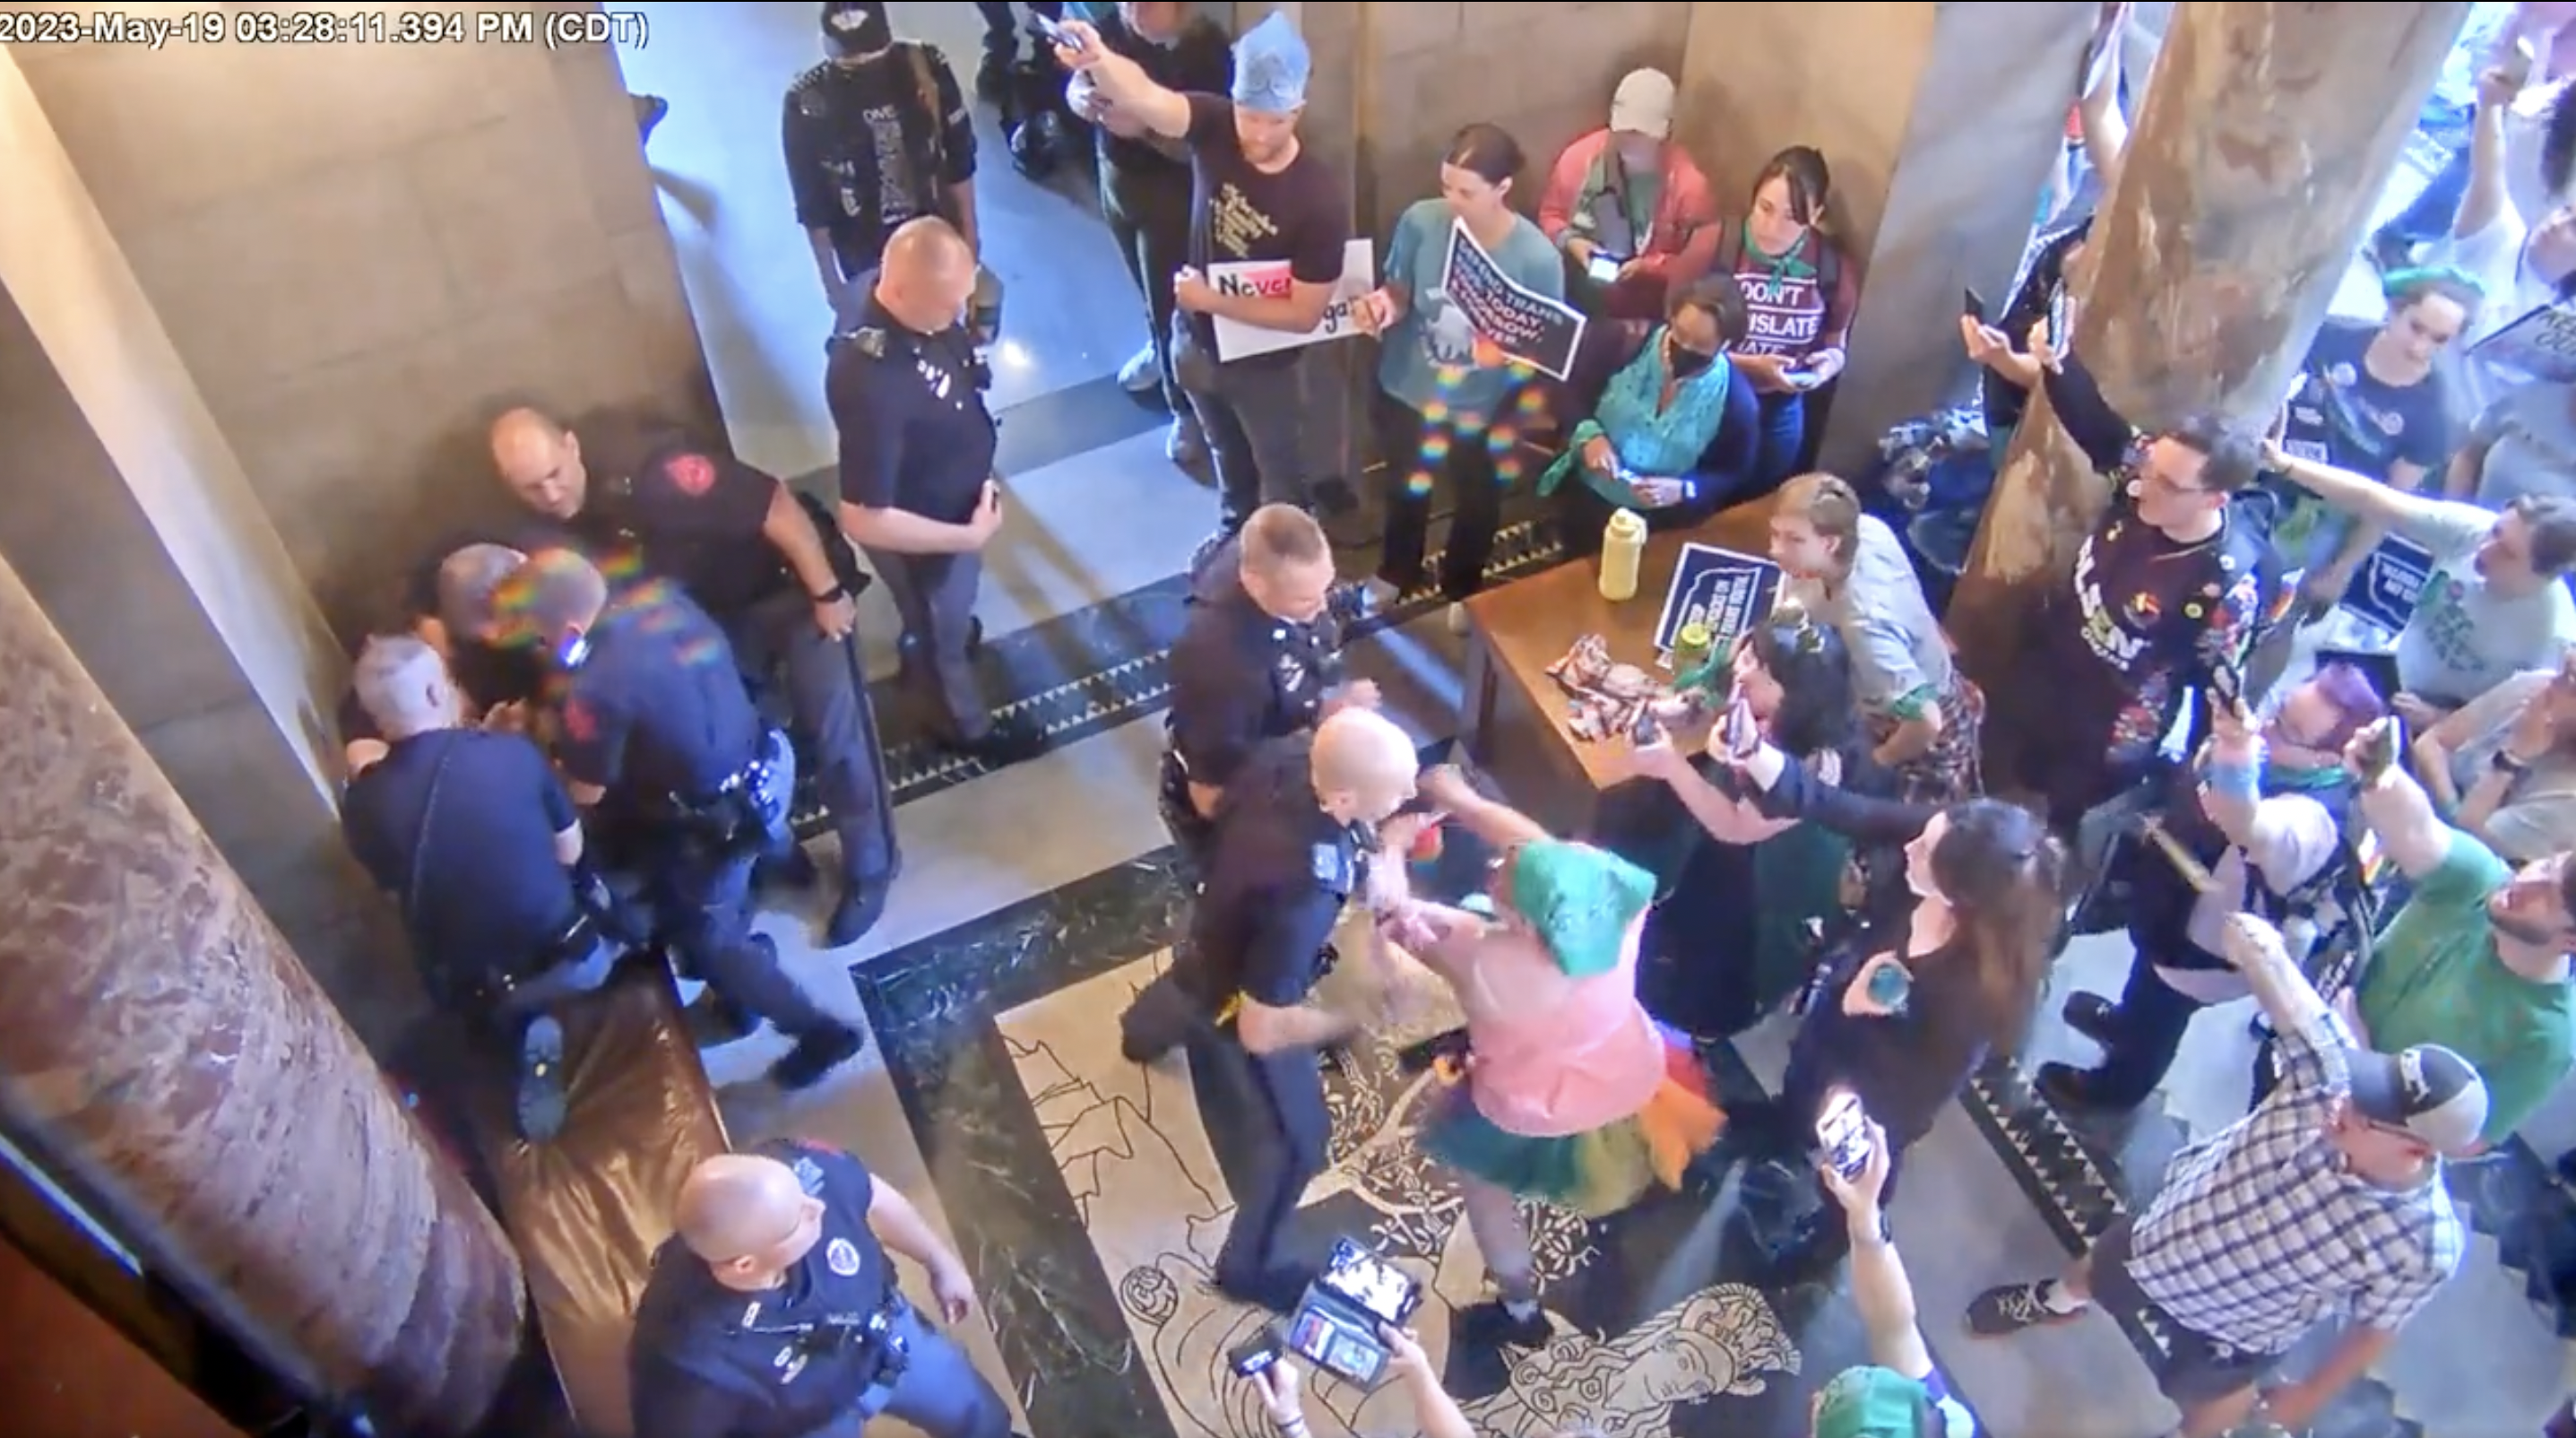 Protester attacks police officer during Republican vote to ban trans procedures on minors.